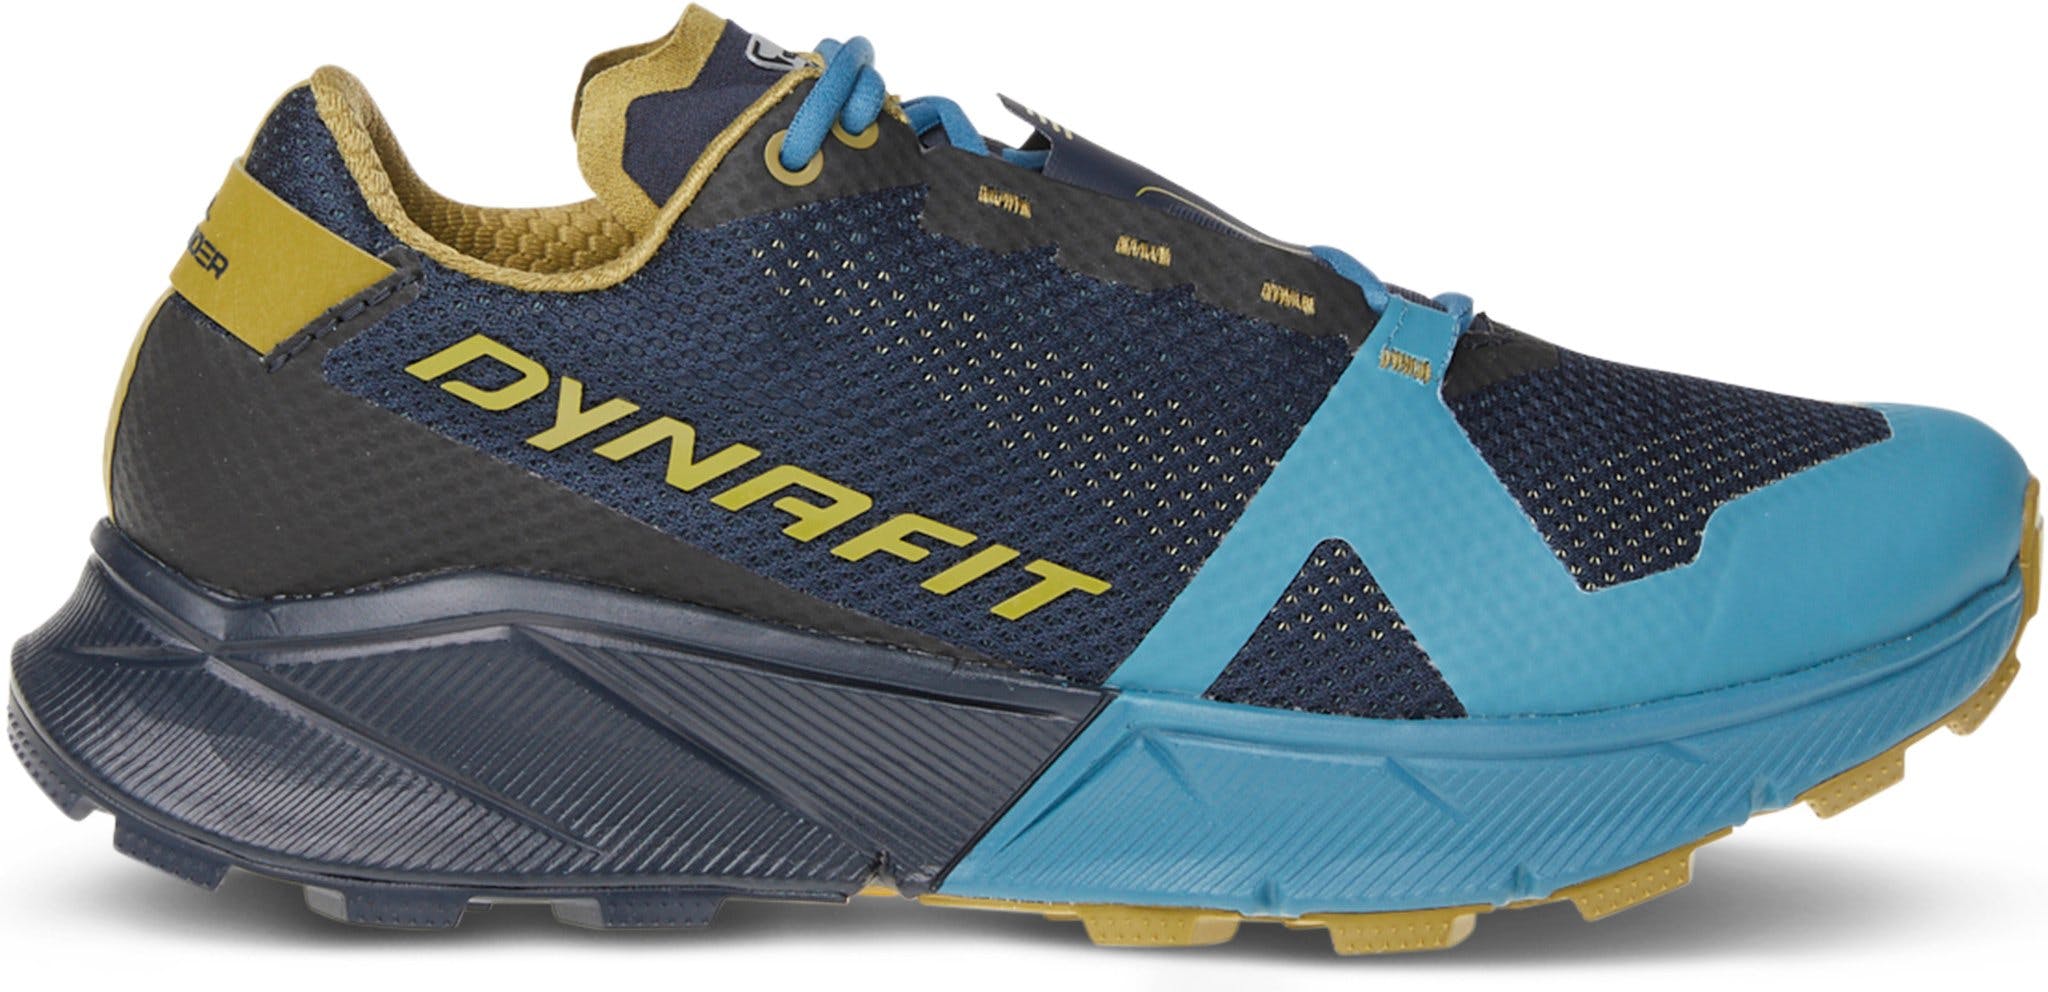 Product image for Ultra 100 Trail Running Shoes - Men's